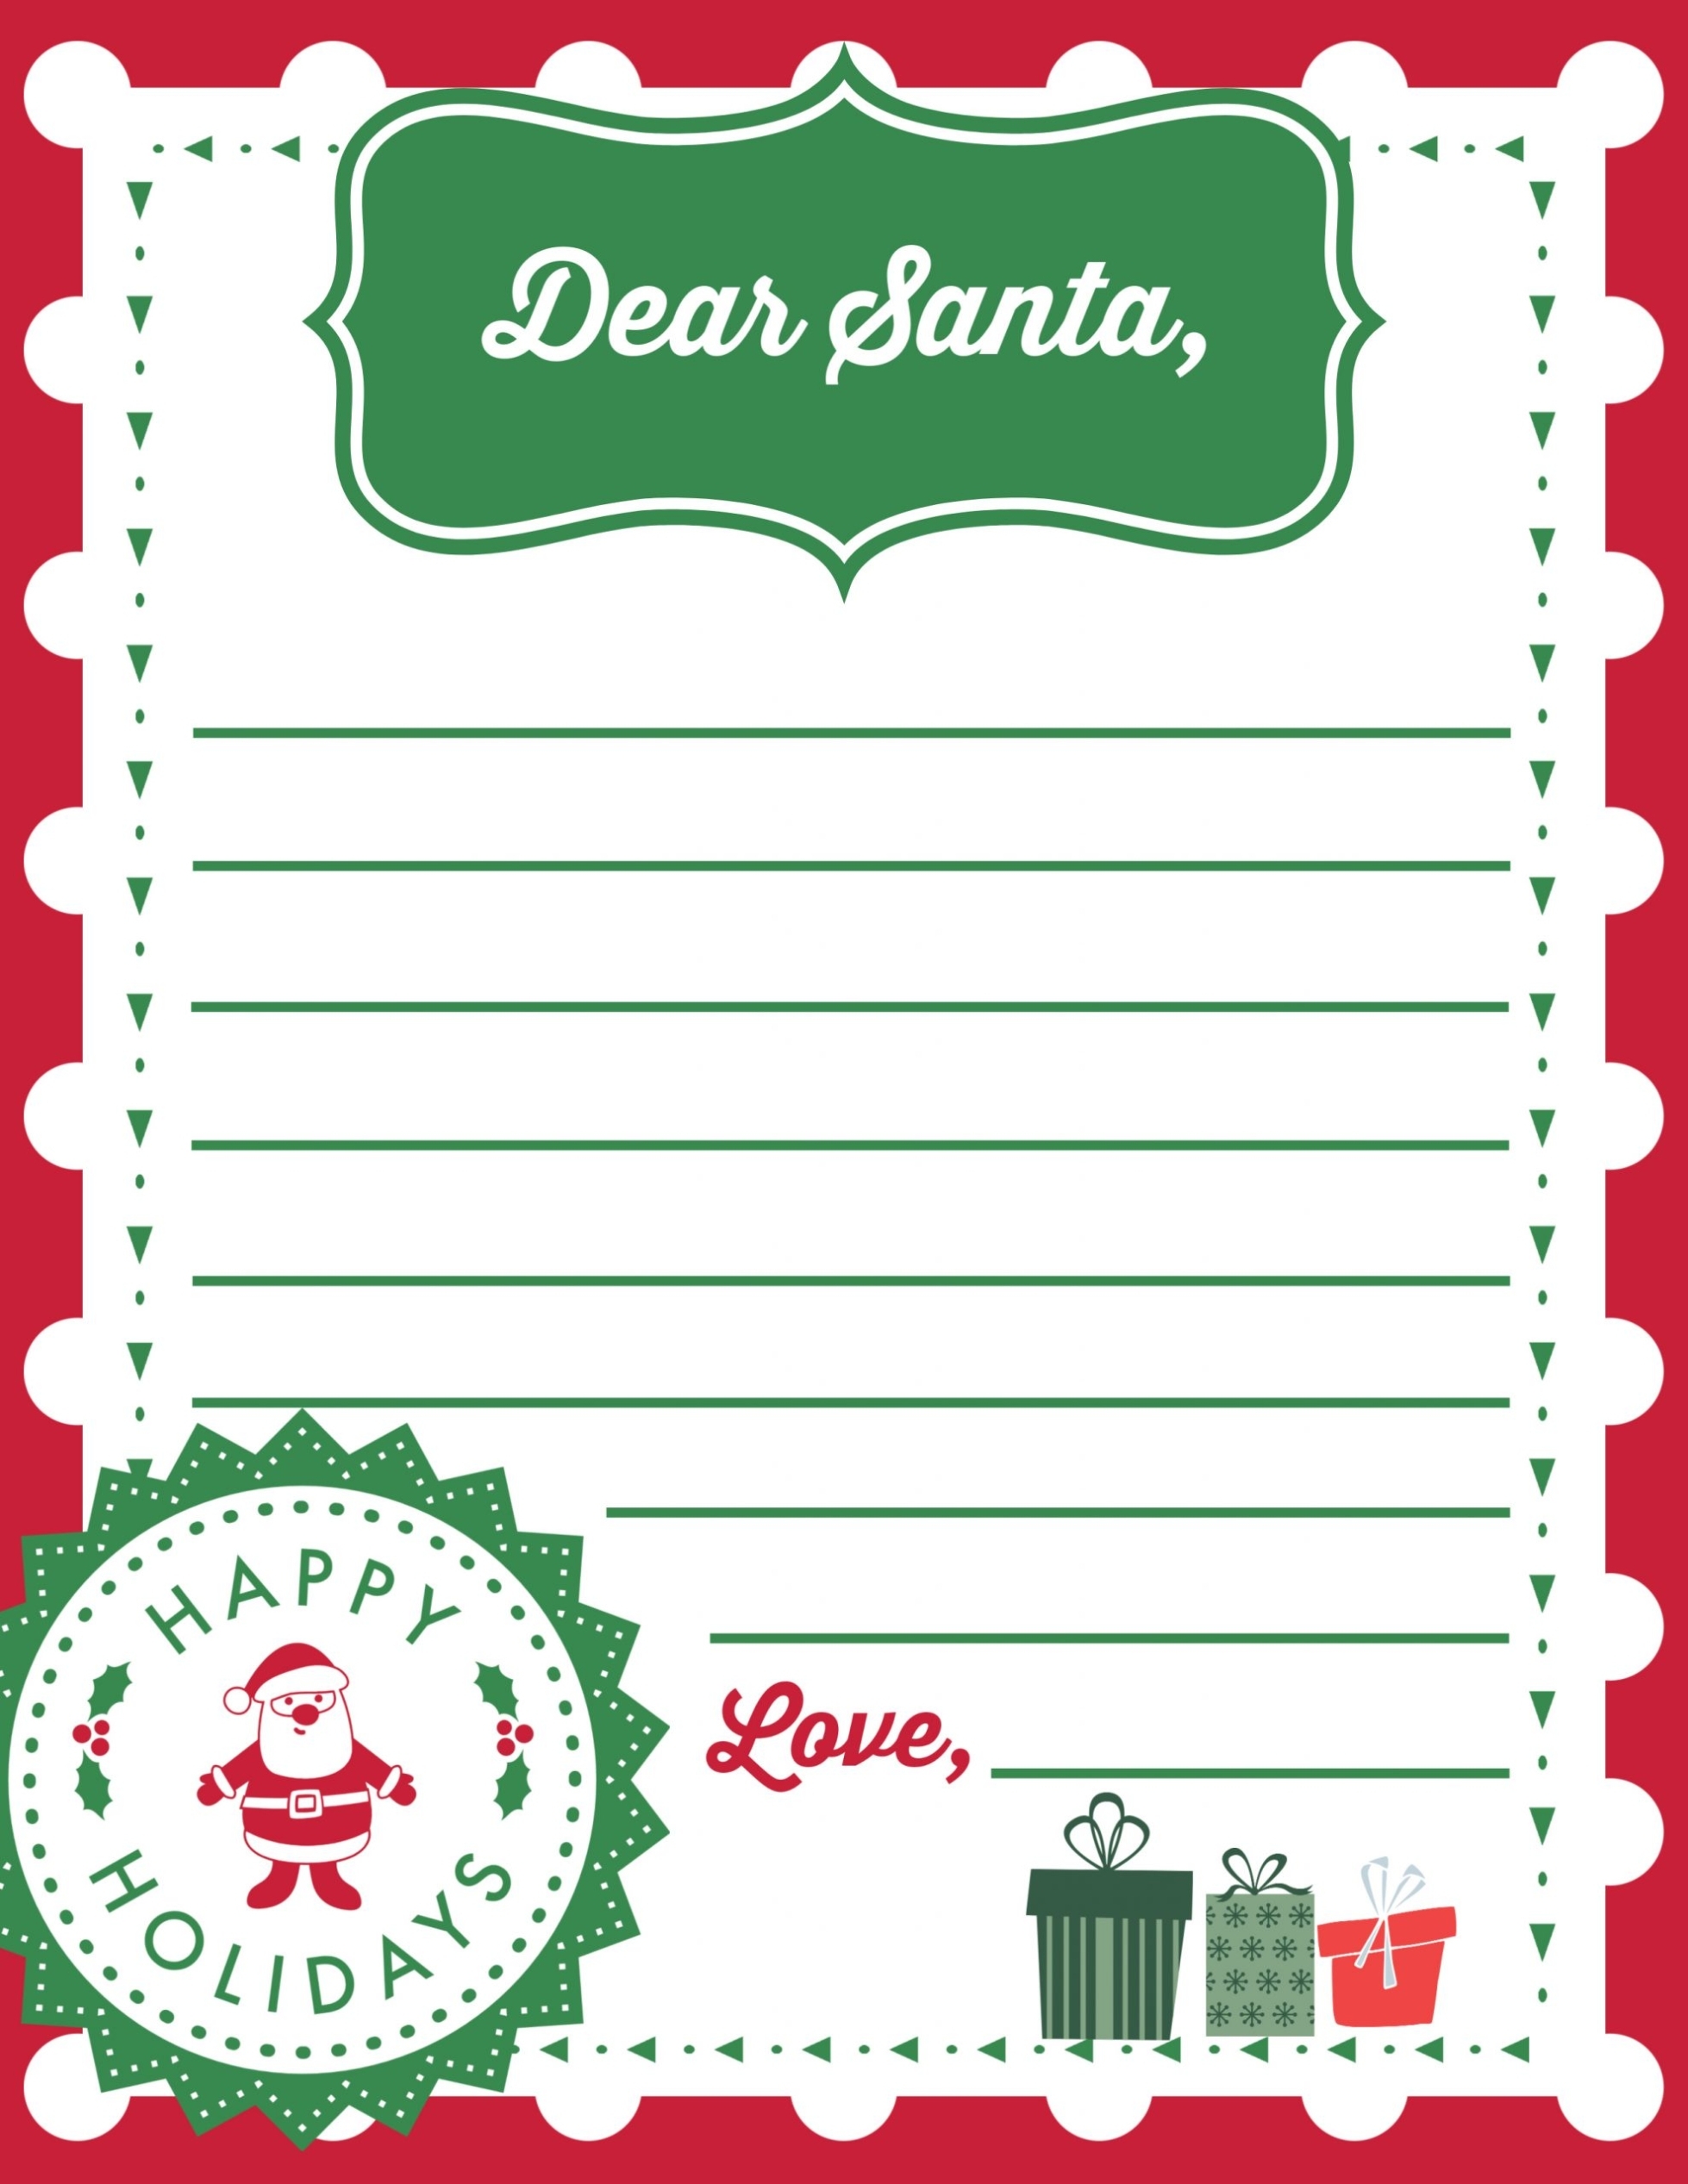 Dear Santa: Letter Template {Free Printables!} | 2020 Within Free Letters From Santa Template